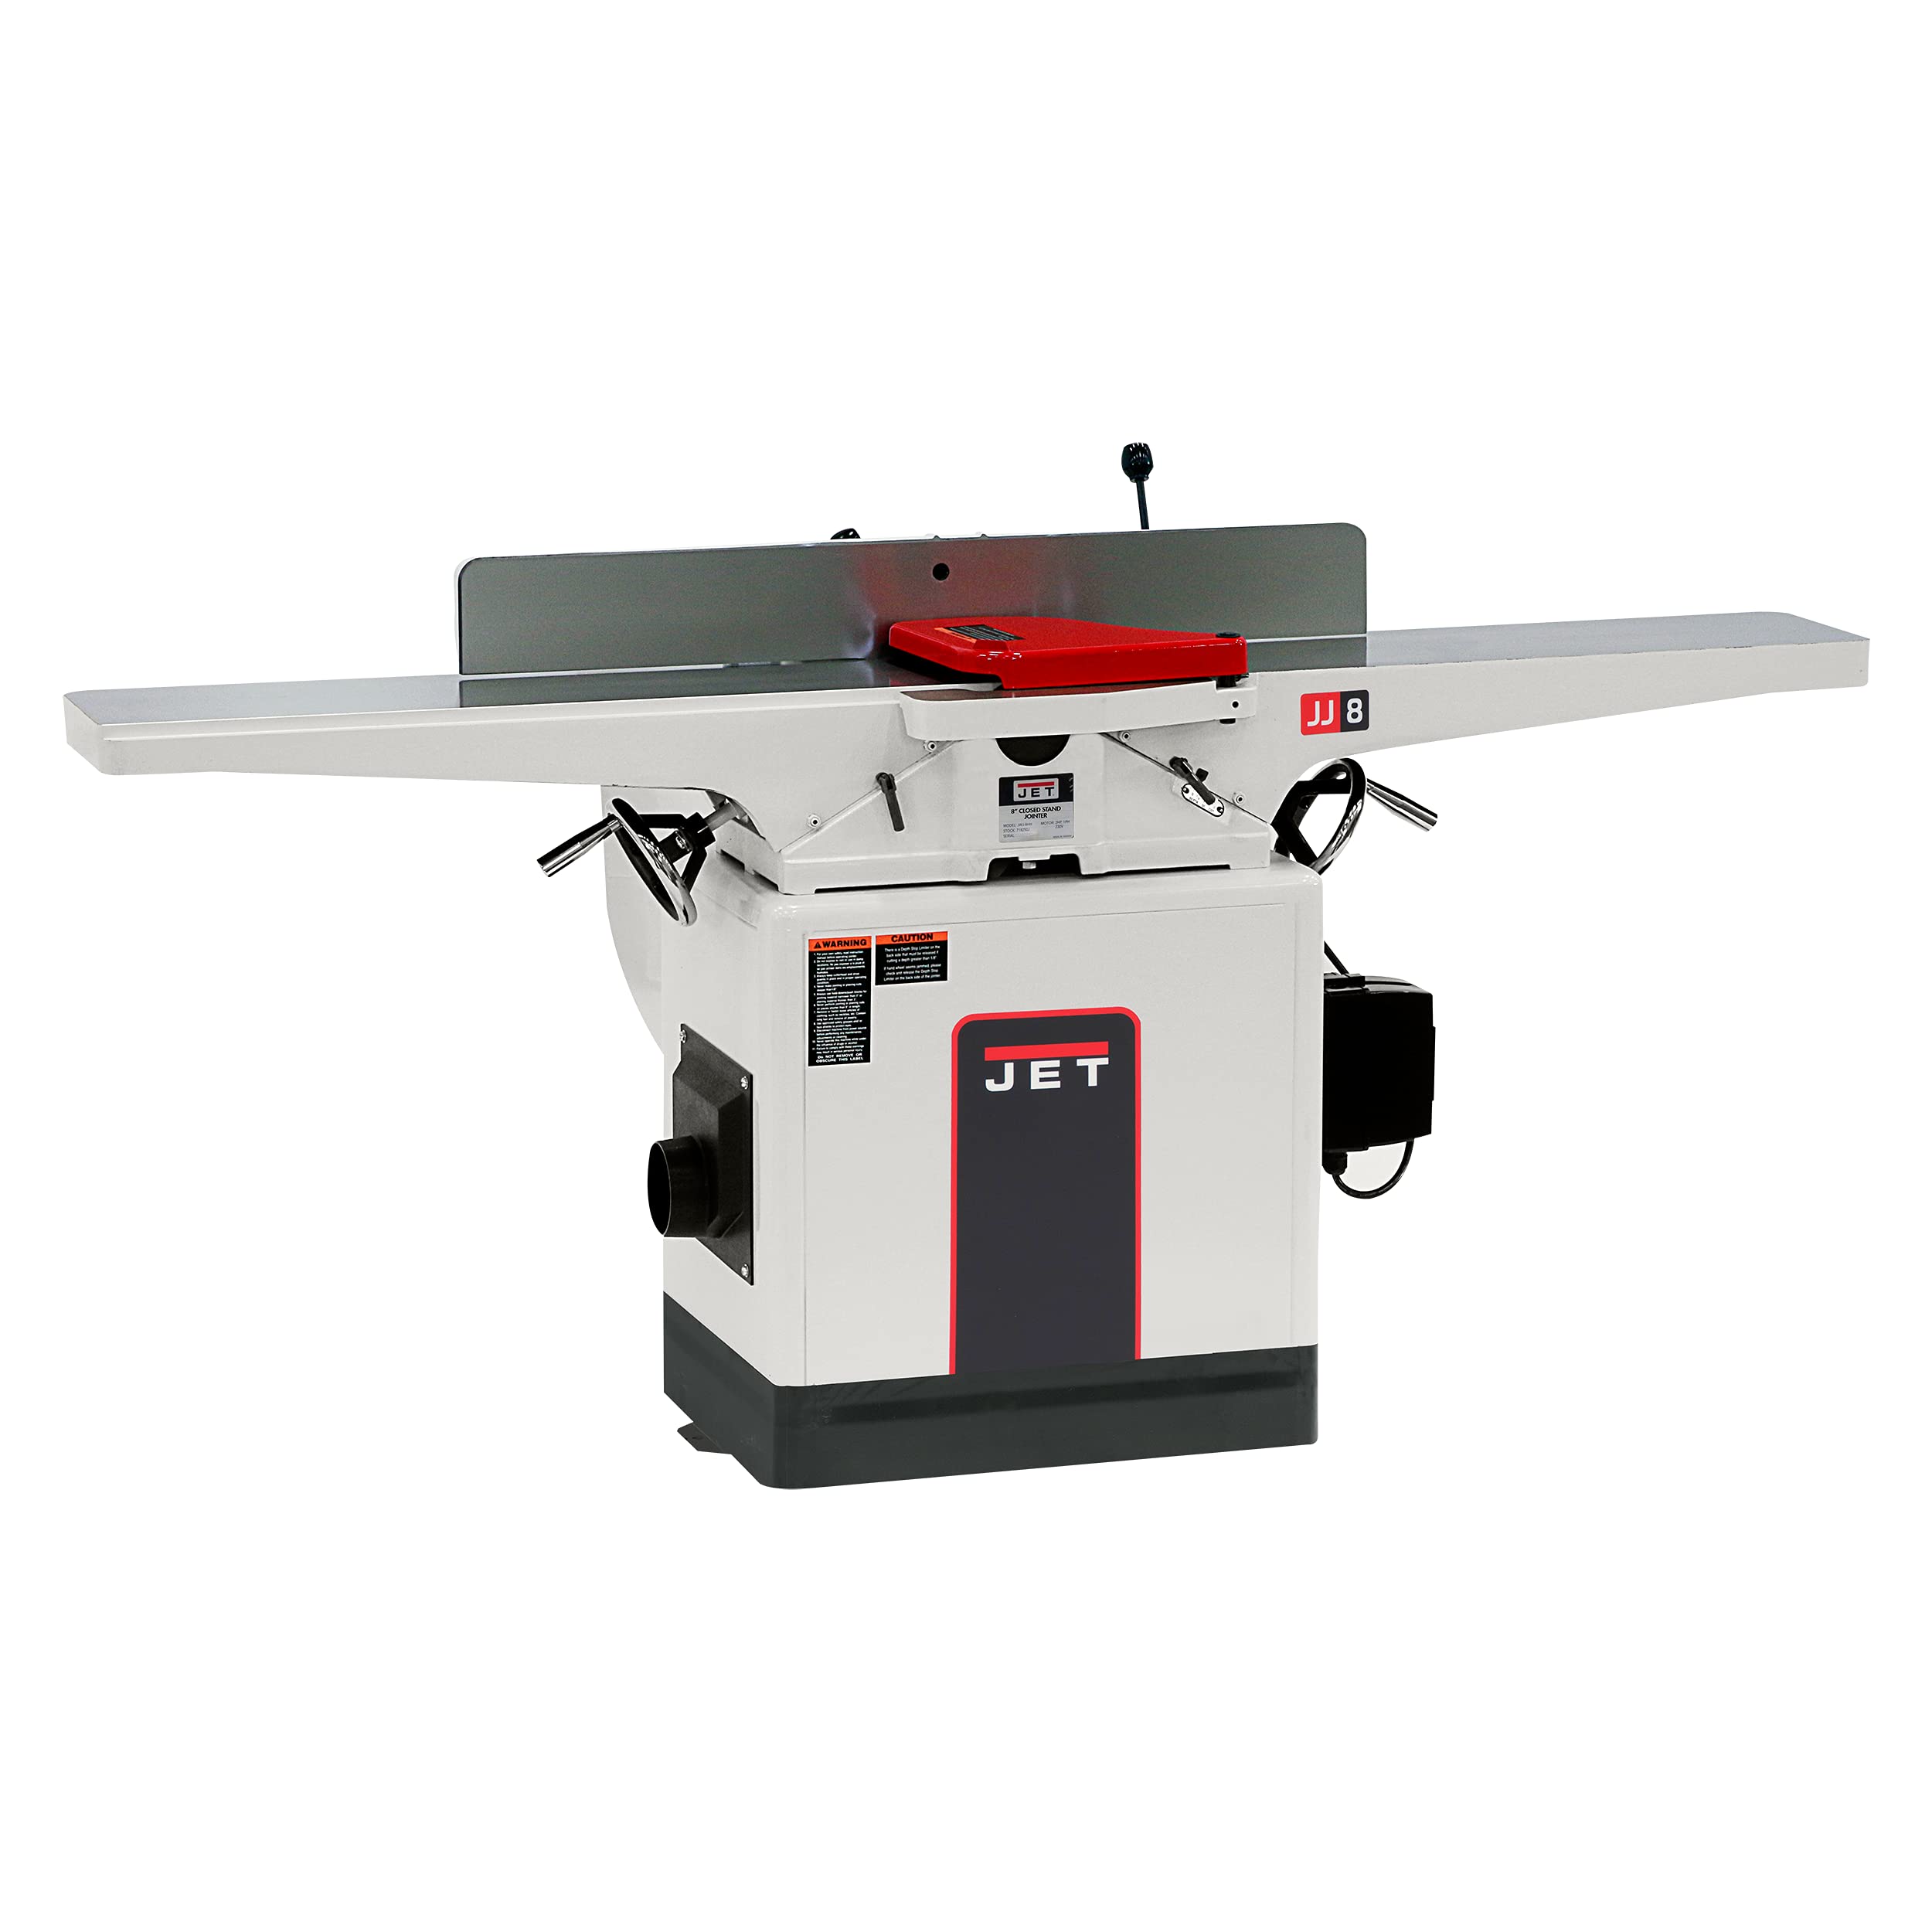 JWJ-8HH 8 In. Jointer 2HP 1PH 230V Helical Head 718250K